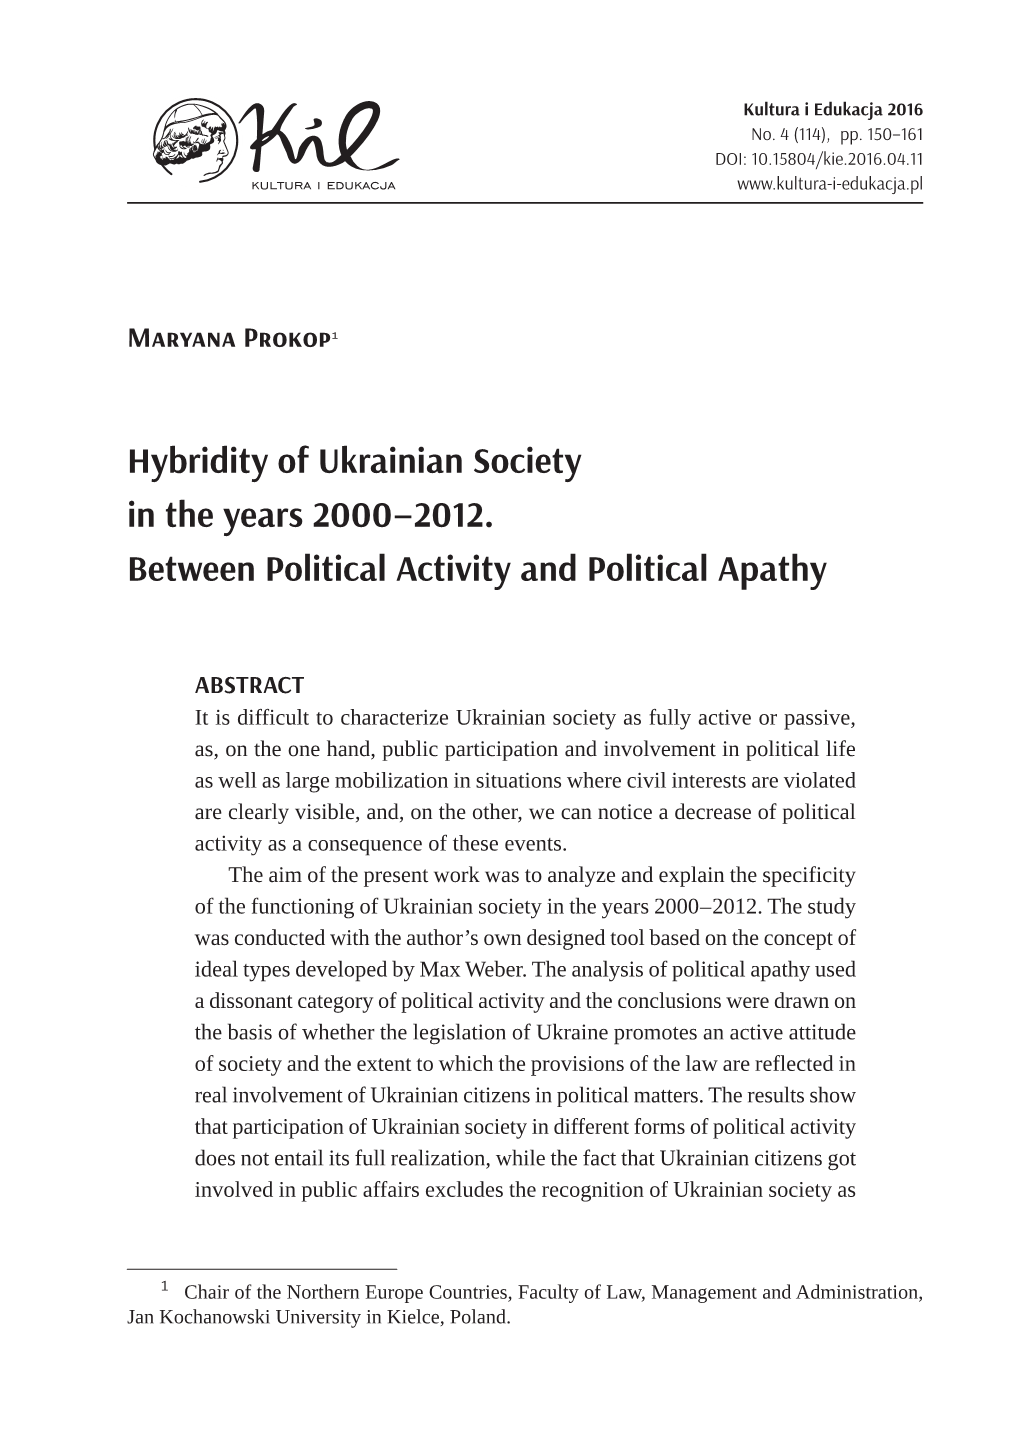 2012 . Between Political Activity and Political Apathy